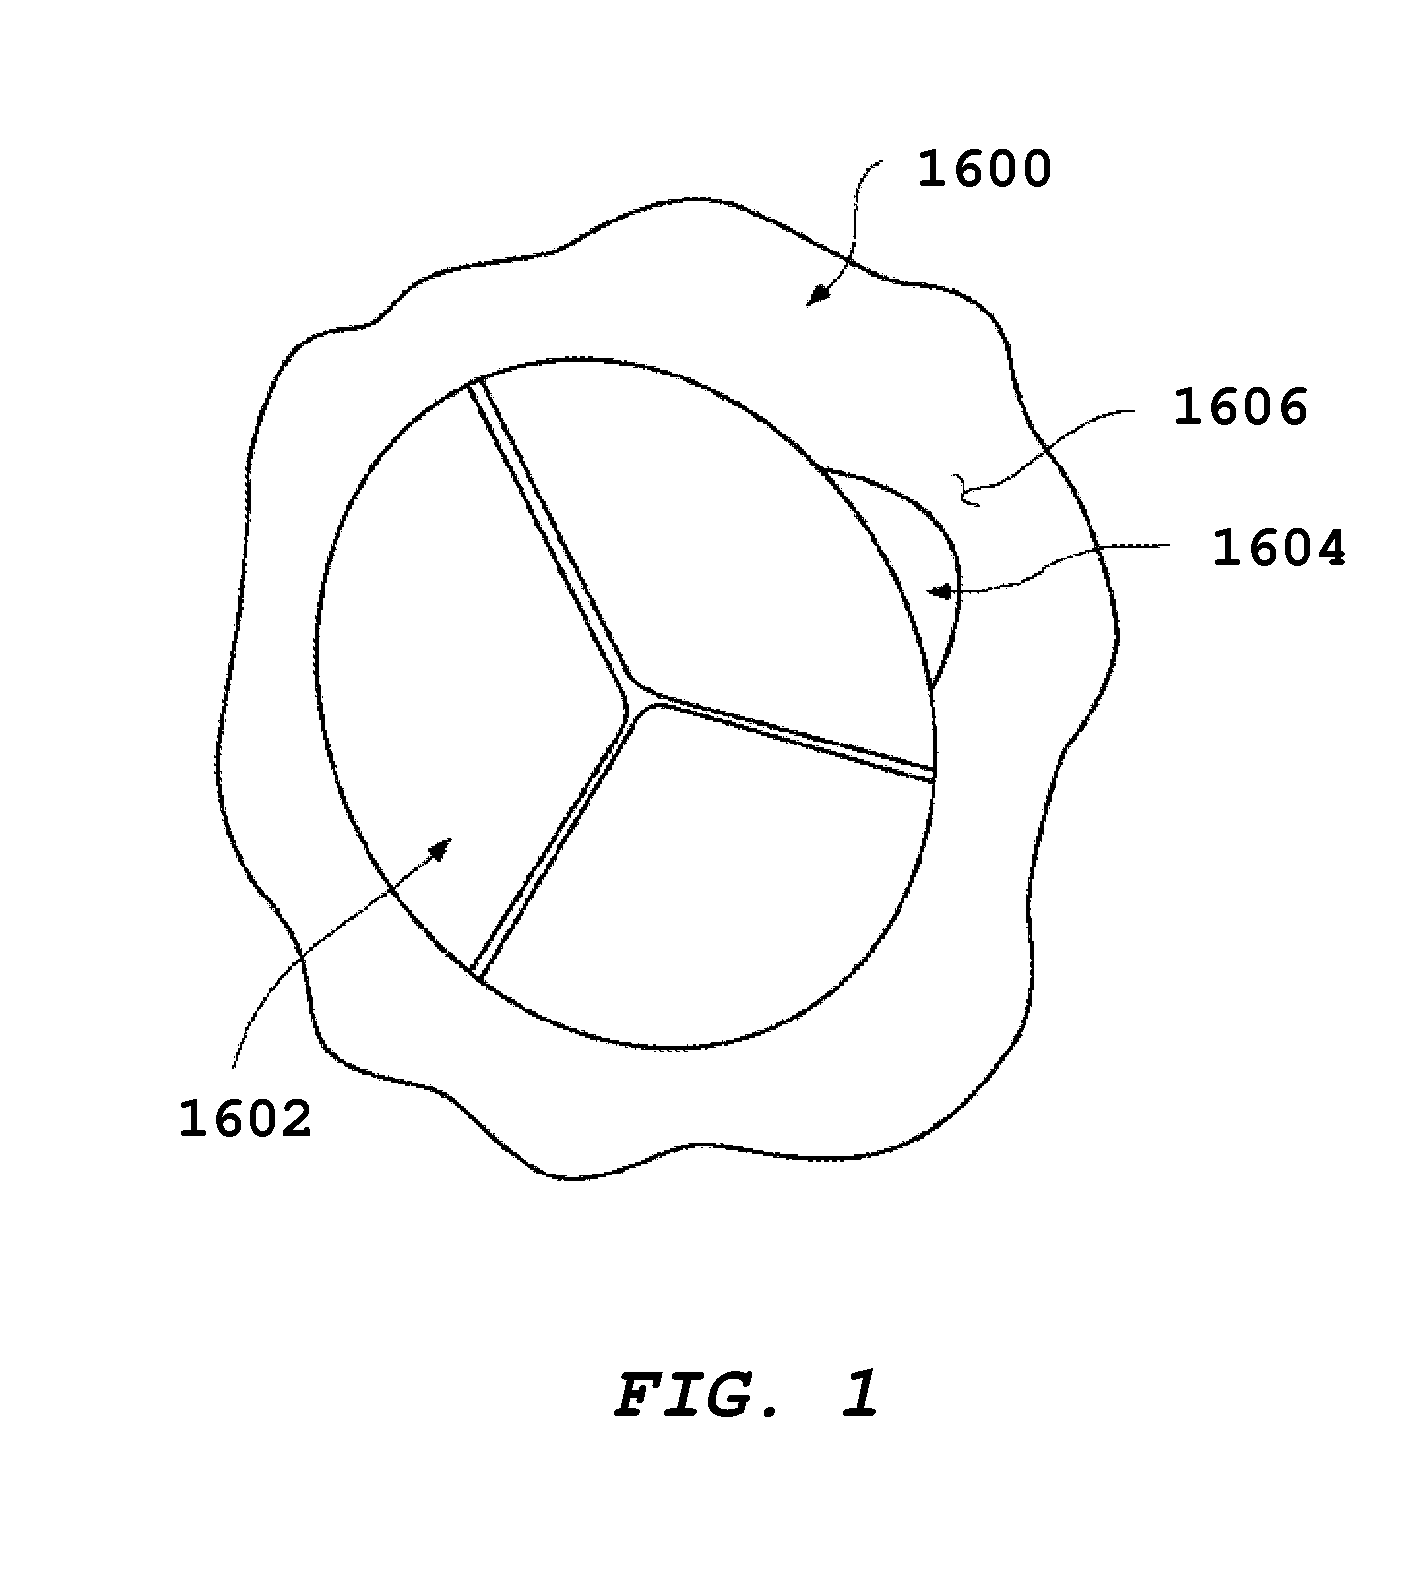 Devices for treating paravalvular leakage and methods use thereof